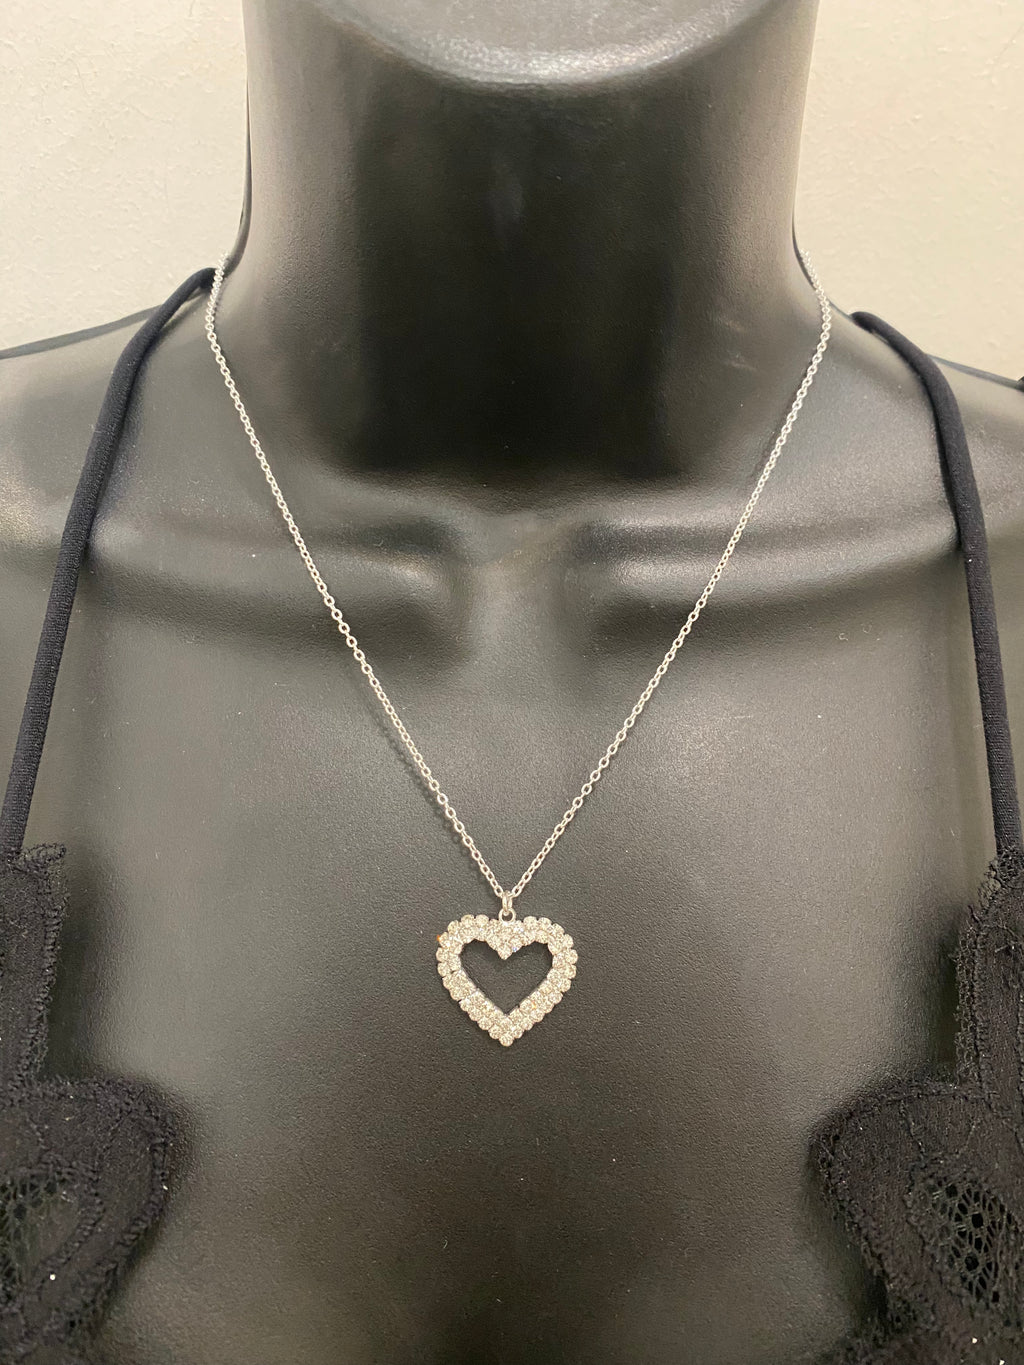 Heart Pendant Necklace in Silver